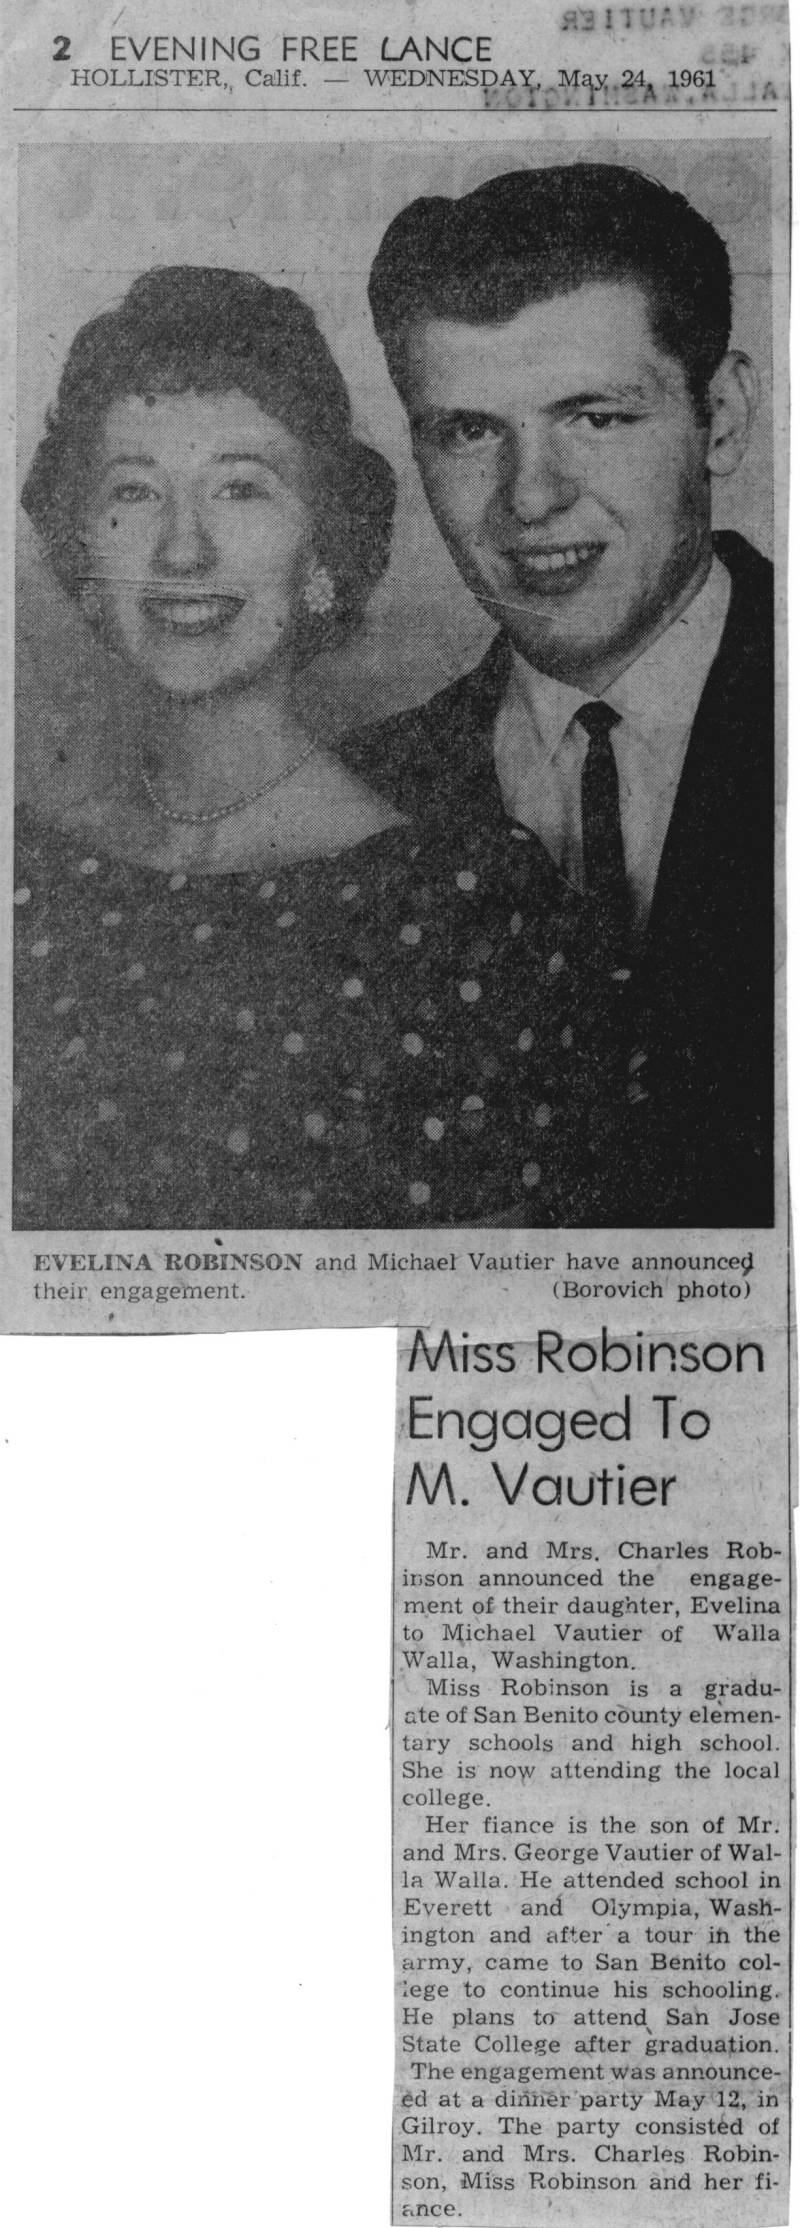 Anthony Michael Vautier & Evelina Robinson's engagement announced in Holister Freelance 5/24/1961.